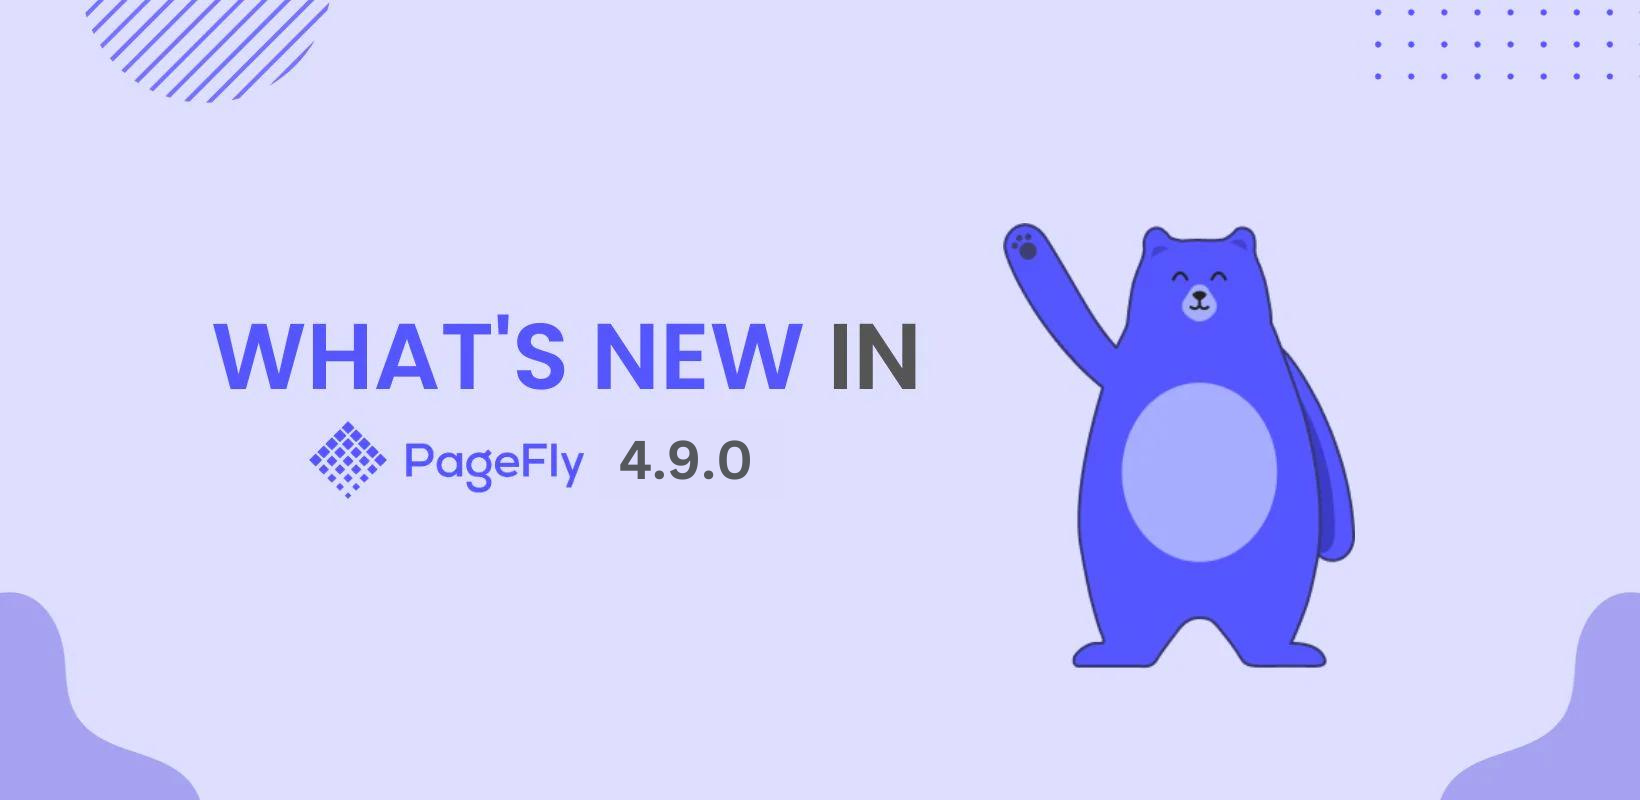 PageFly 4.9.0: Unleash 6 Cutting-Edge Integrations for a Revolutionary User Experience